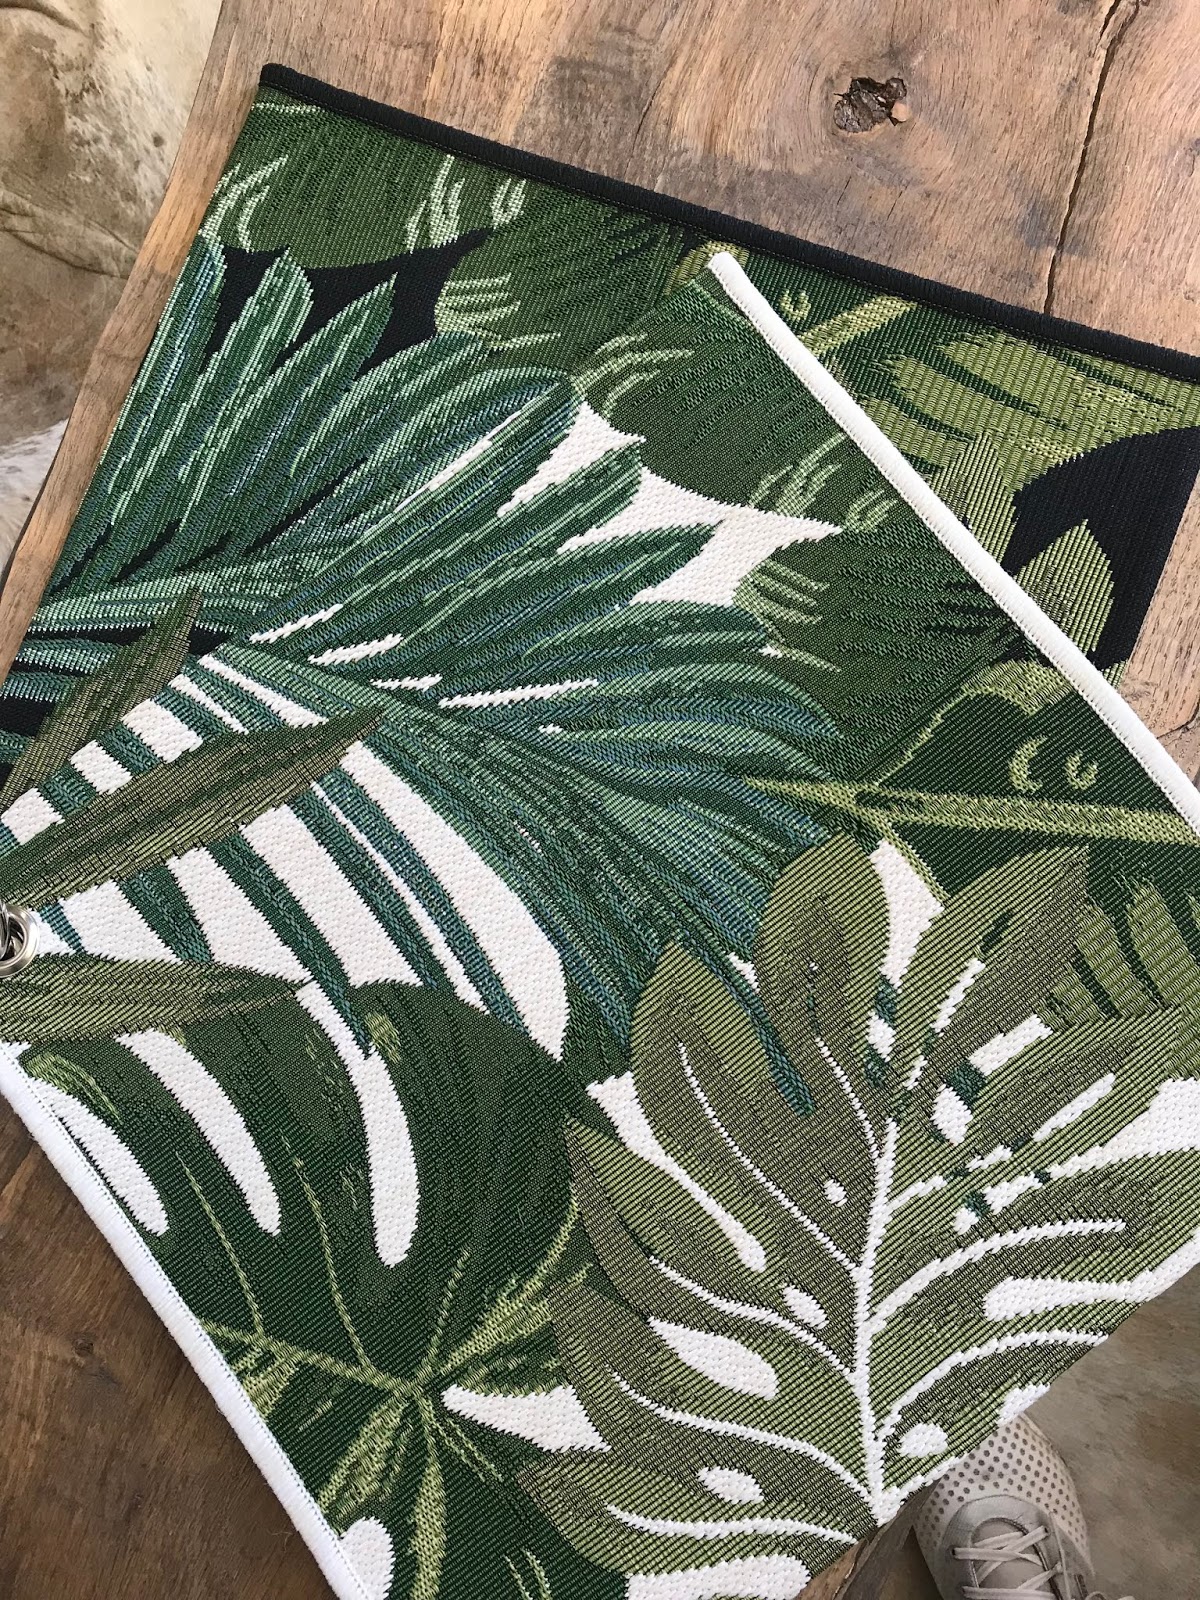 New Hertex Inside Out Rugs- Delicious Rug Range - Placemat , HD Wallpaper & Backgrounds